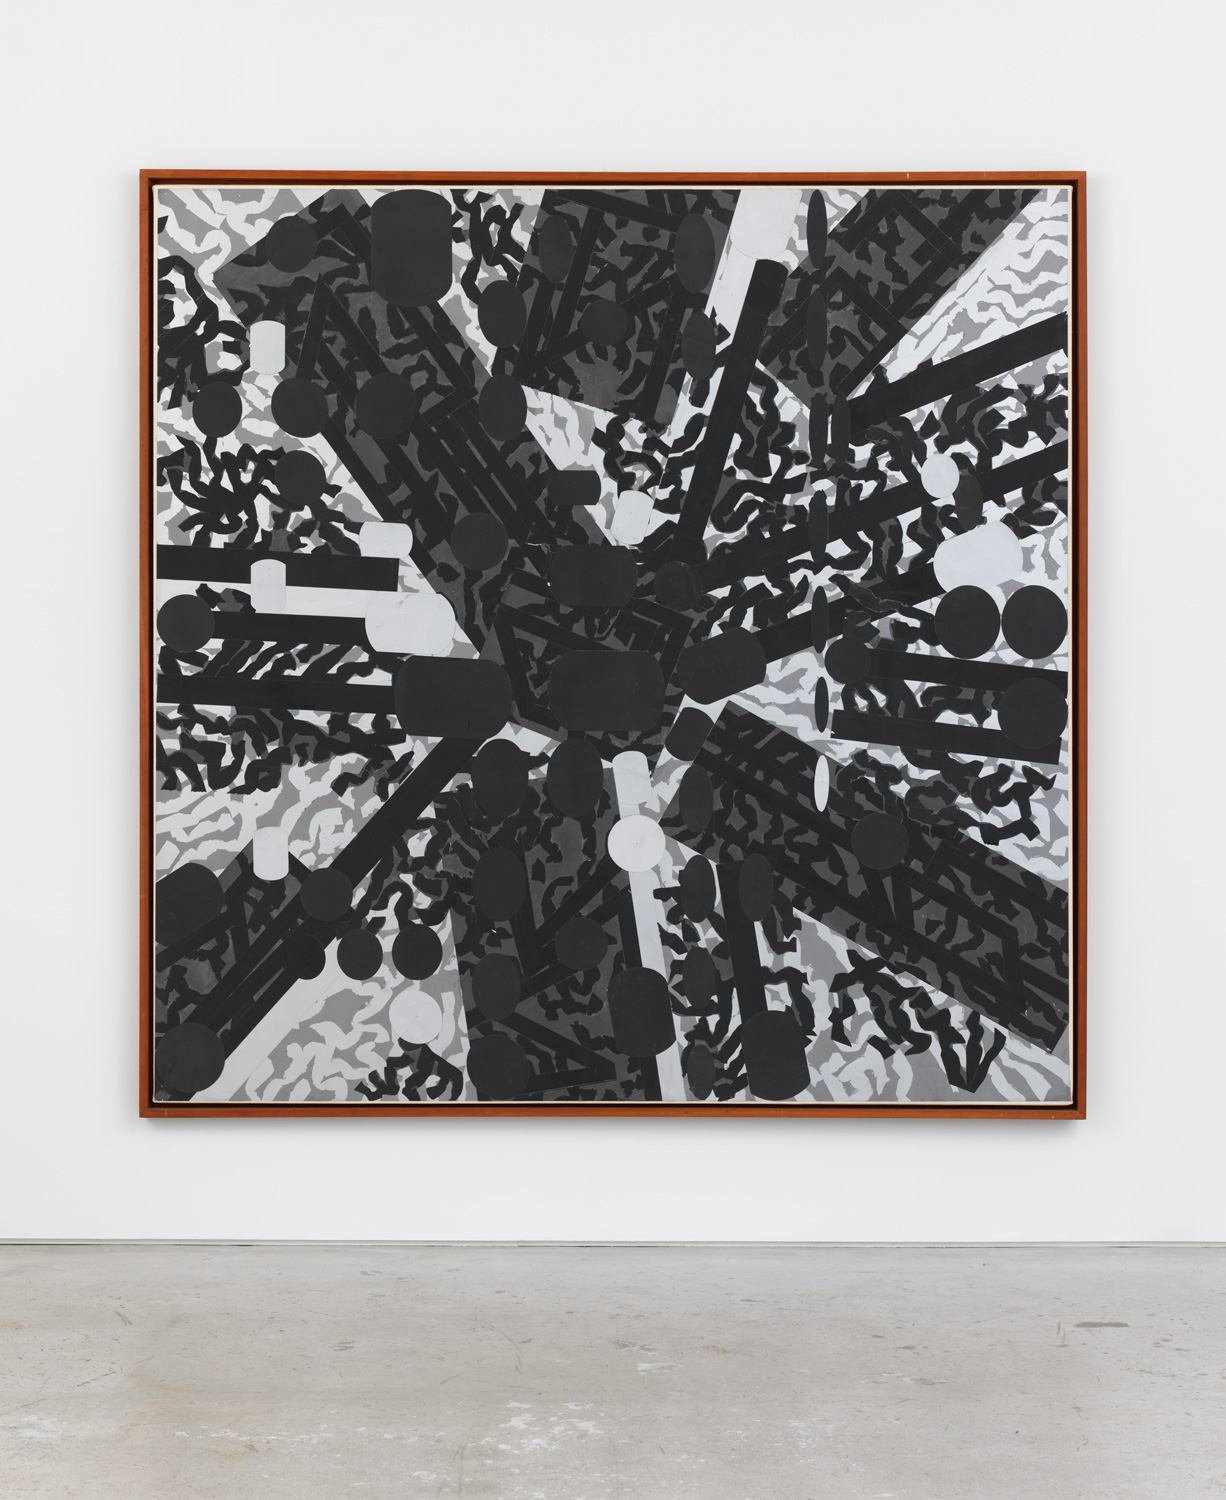 Barry Le Va, Diagrammatic Silhouettes: Sculptured Activities (Black Stress), 1987, ink on paper, cut and glued to ink on paper, 80h x 80w in.  © Barry Le Va. Courtesy David Nolan Gallery, New York, NY